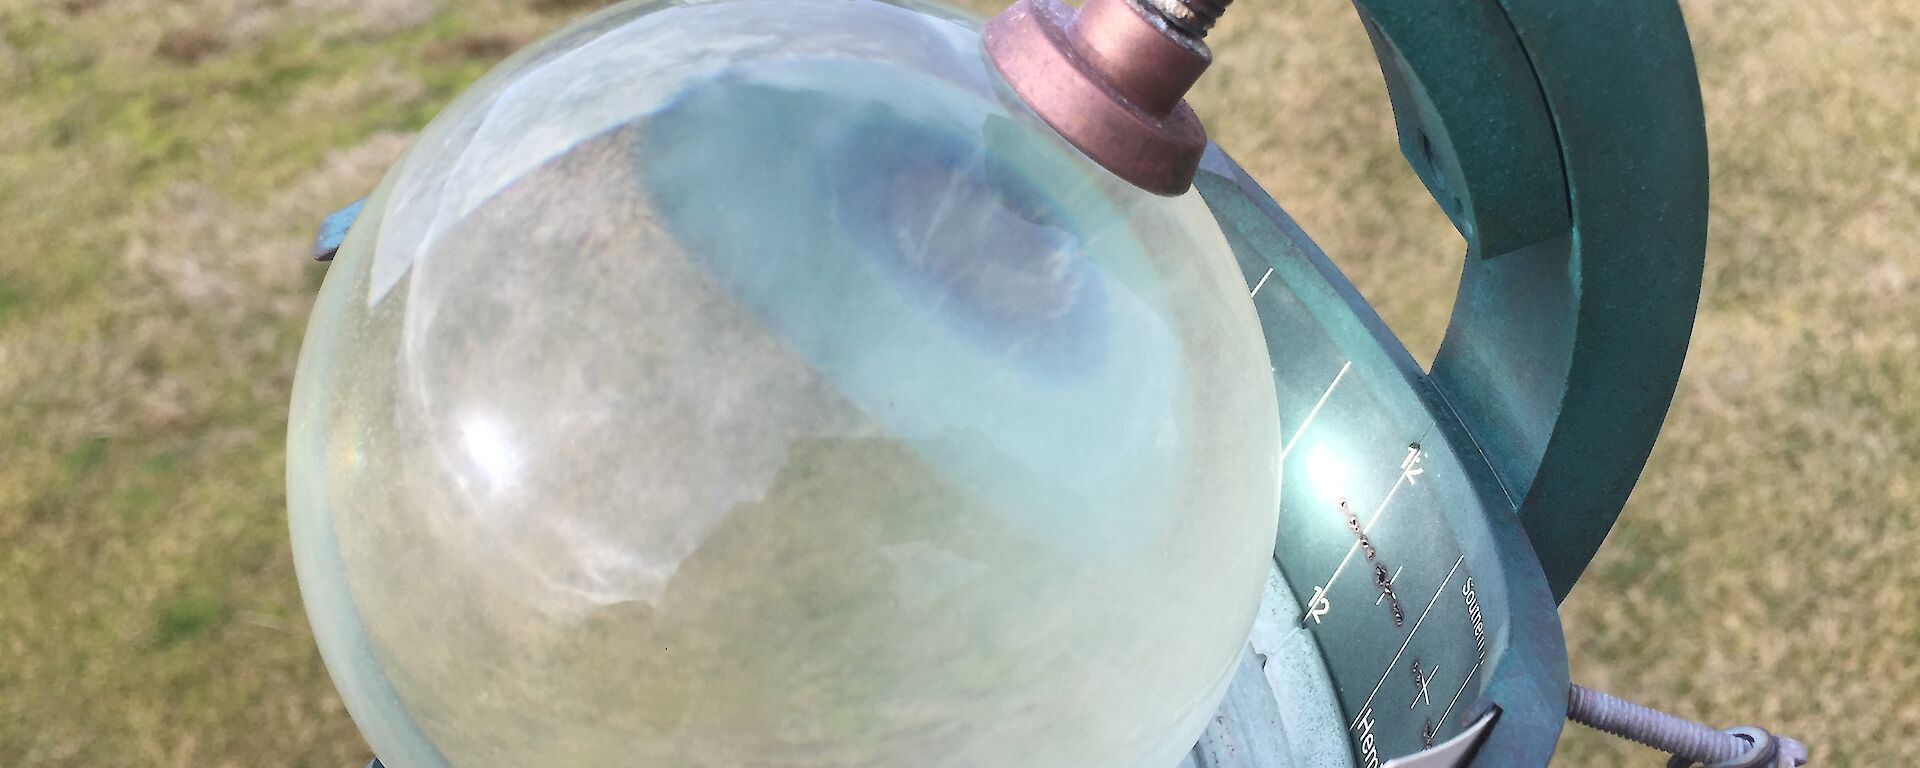 A glass globe sits in a frame and is used to measure hours of sunshine